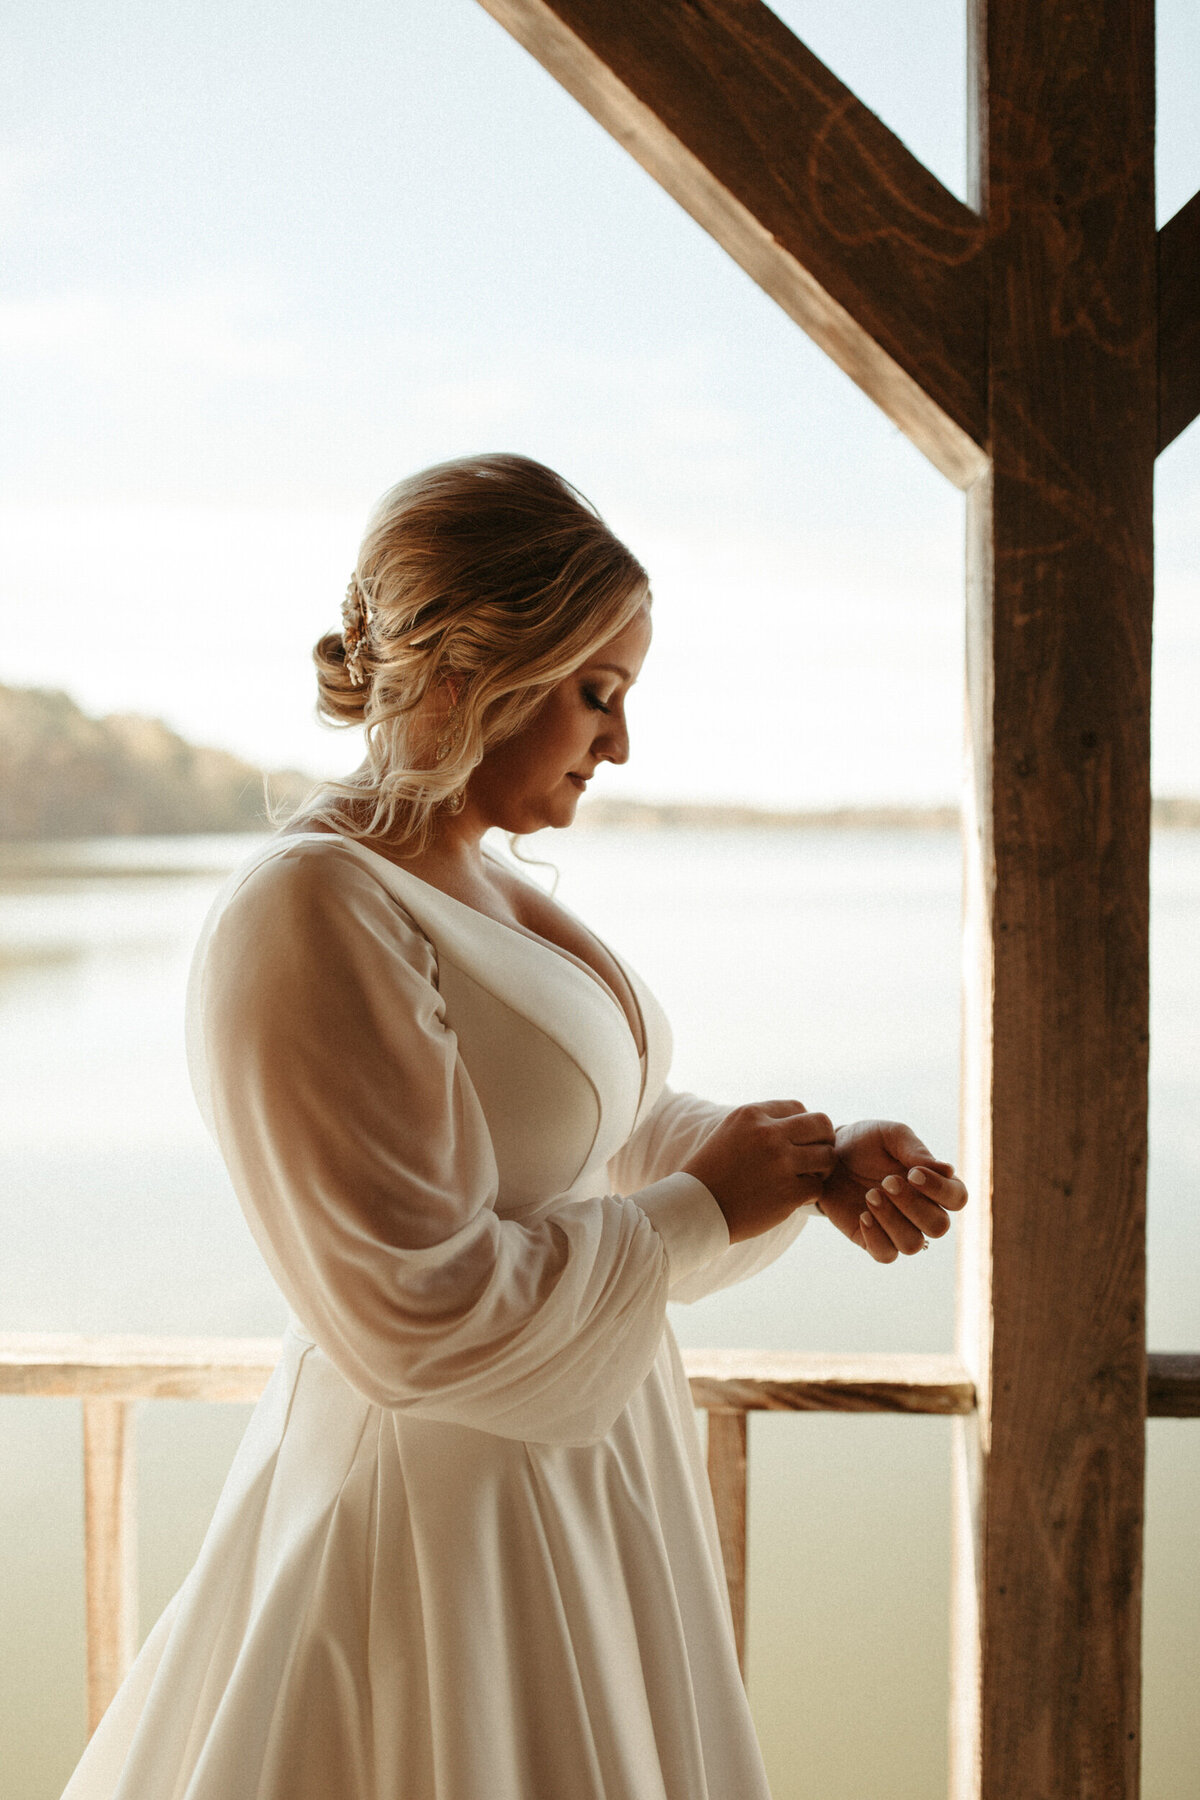 columbus-west-point-mississippi-wedding-waverly-waters-bride-getting-ready-lake-3